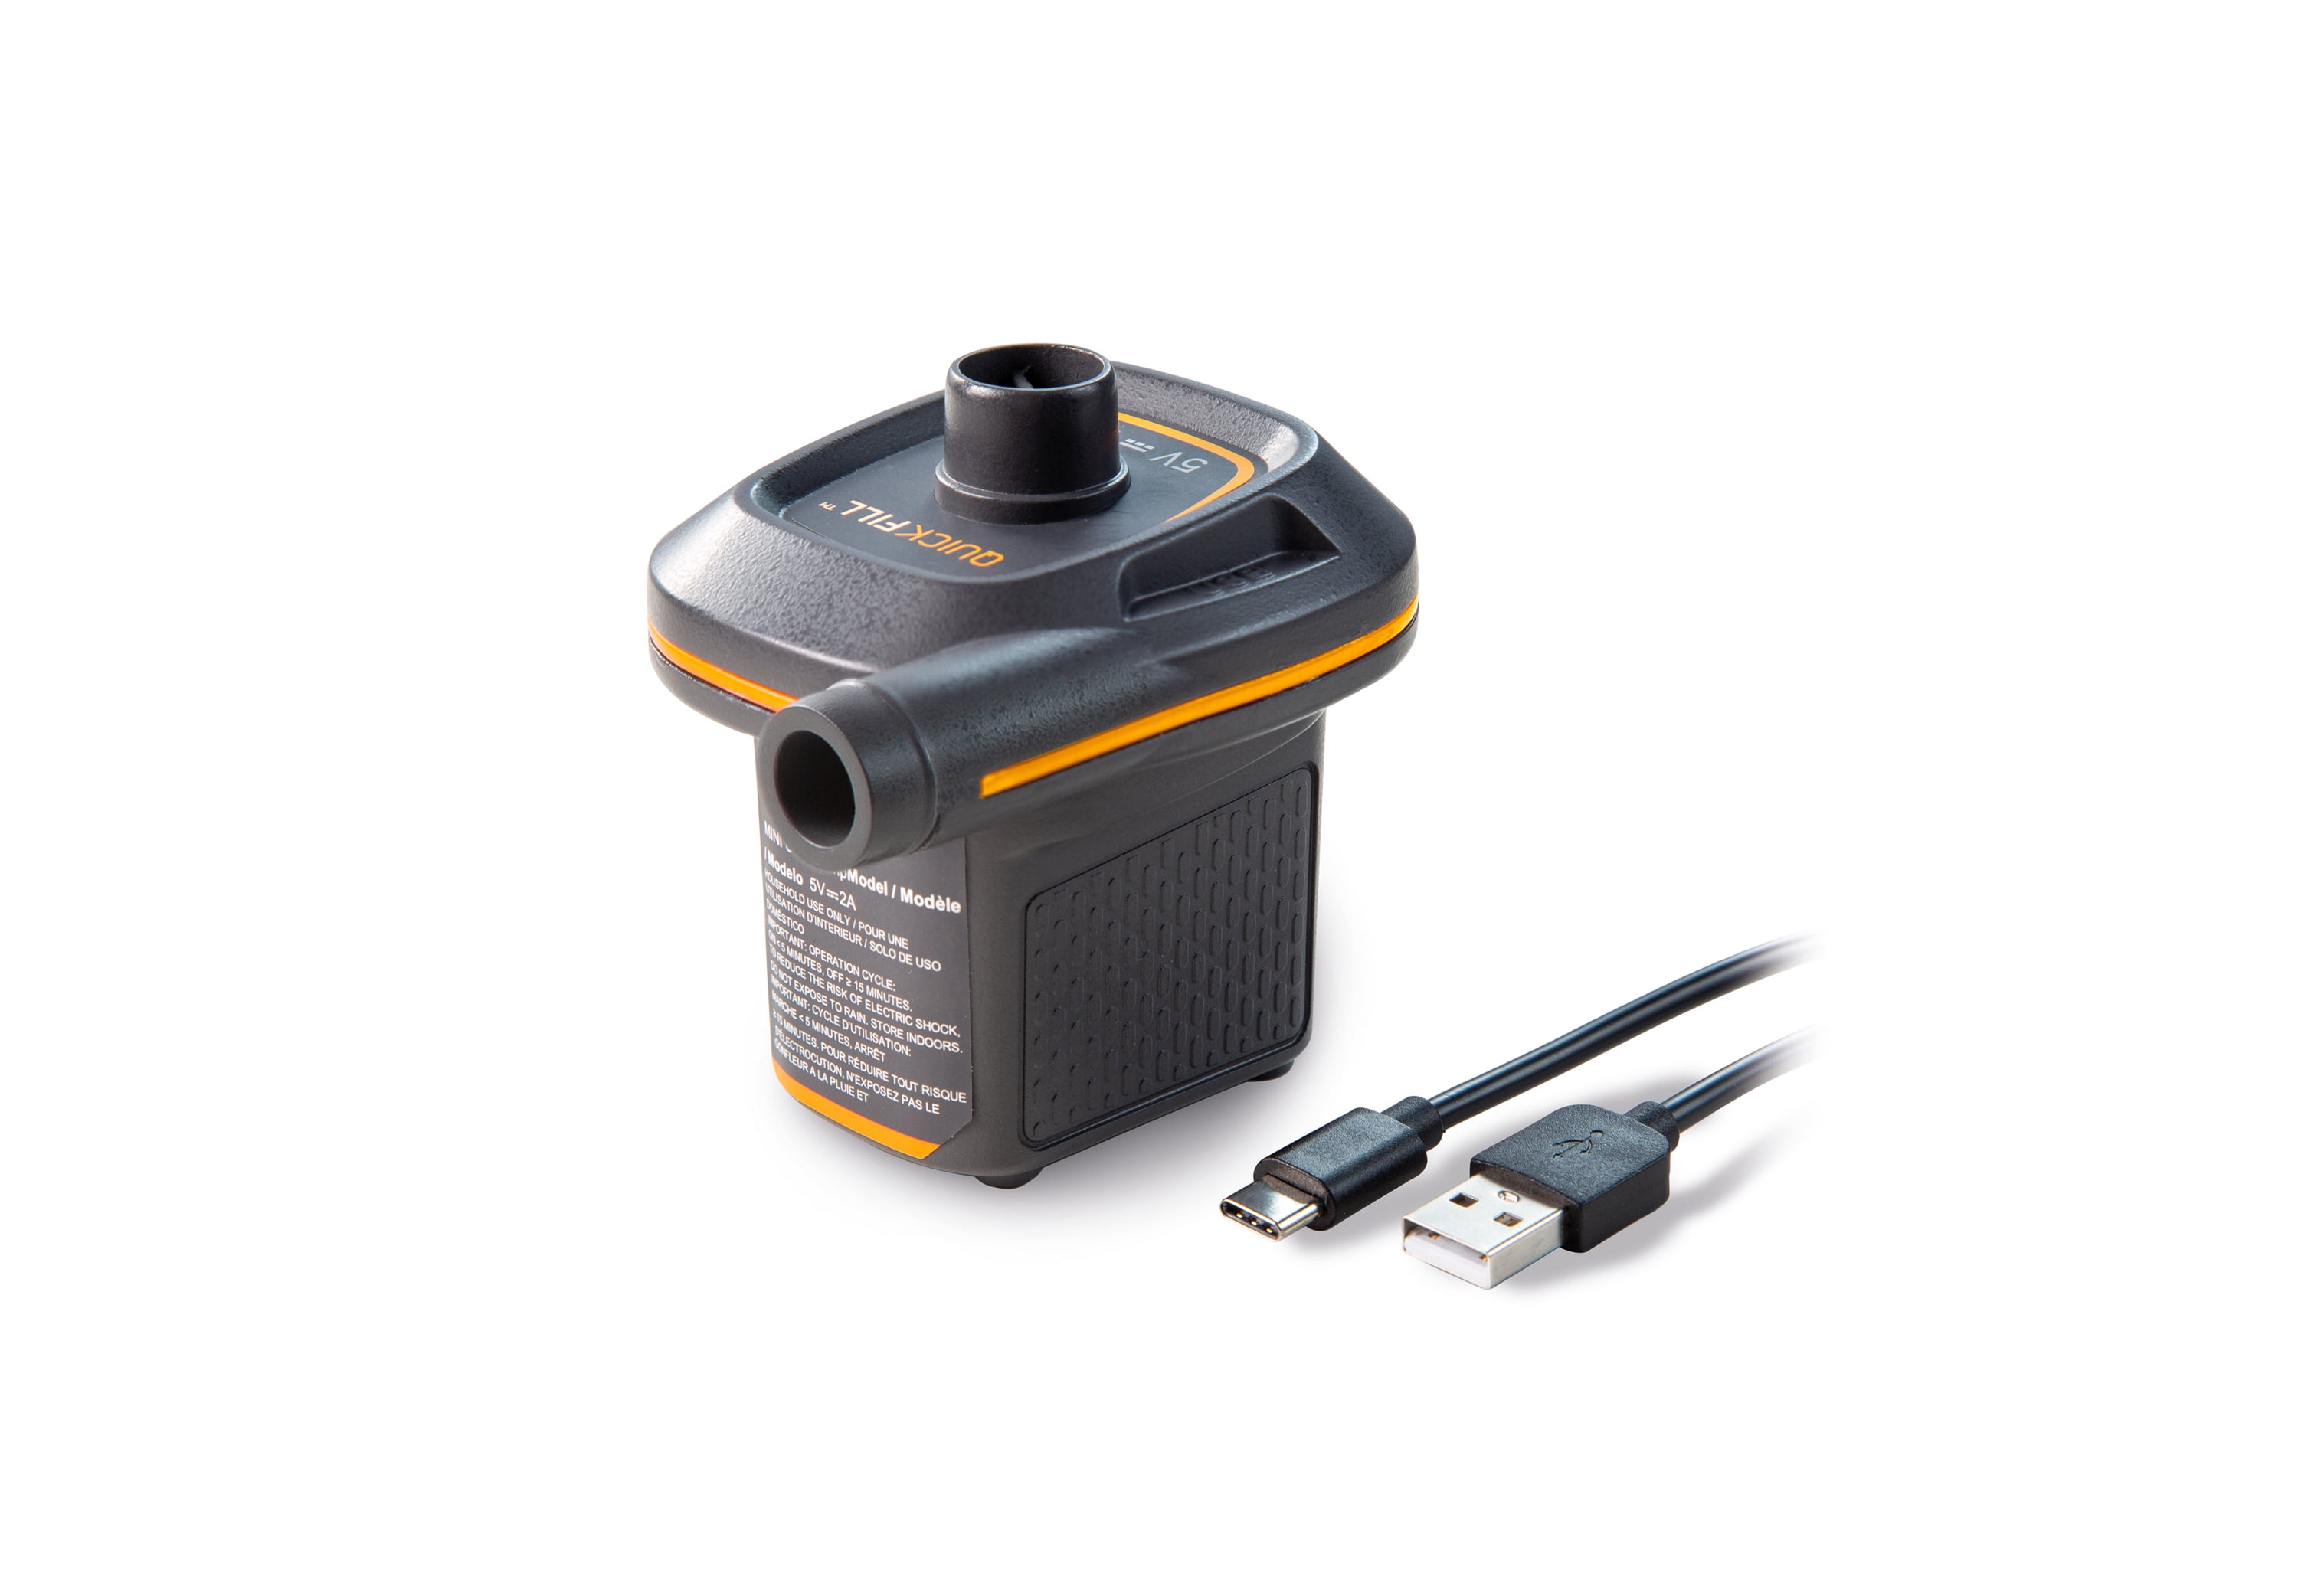 Intex Mini USB Powered Air Pump - Small Black with Orange accents, 4.25 inches x 4.25 inches x 3inches